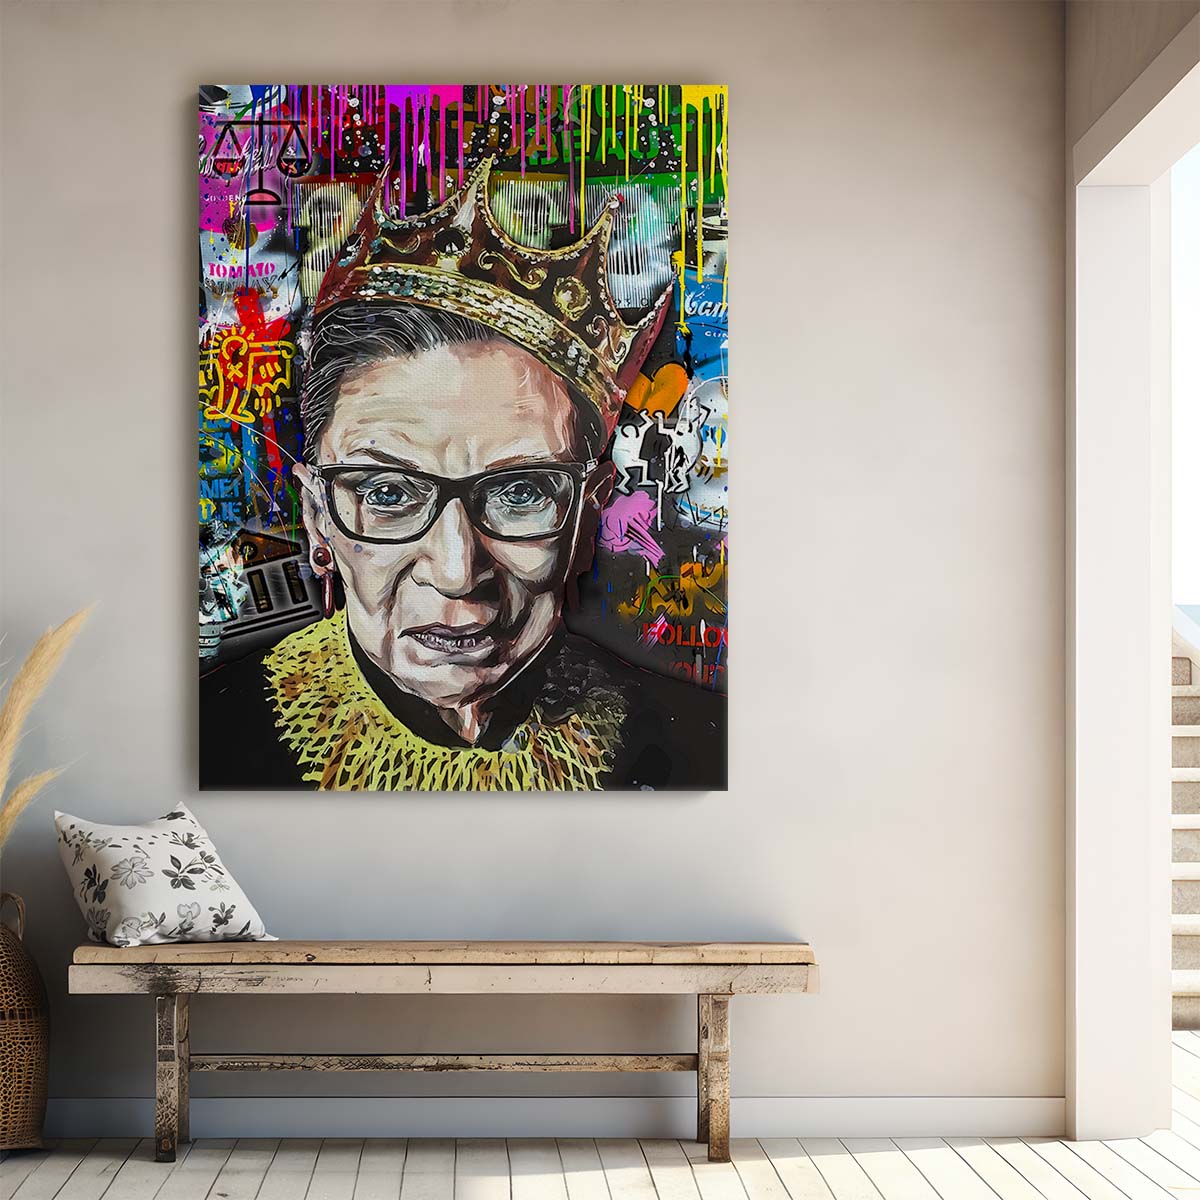 Supreme Court Justice Ruth Bader Ginsburg Portrait Graffiti Wall Art by Luxuriance Designs. Made in USA.